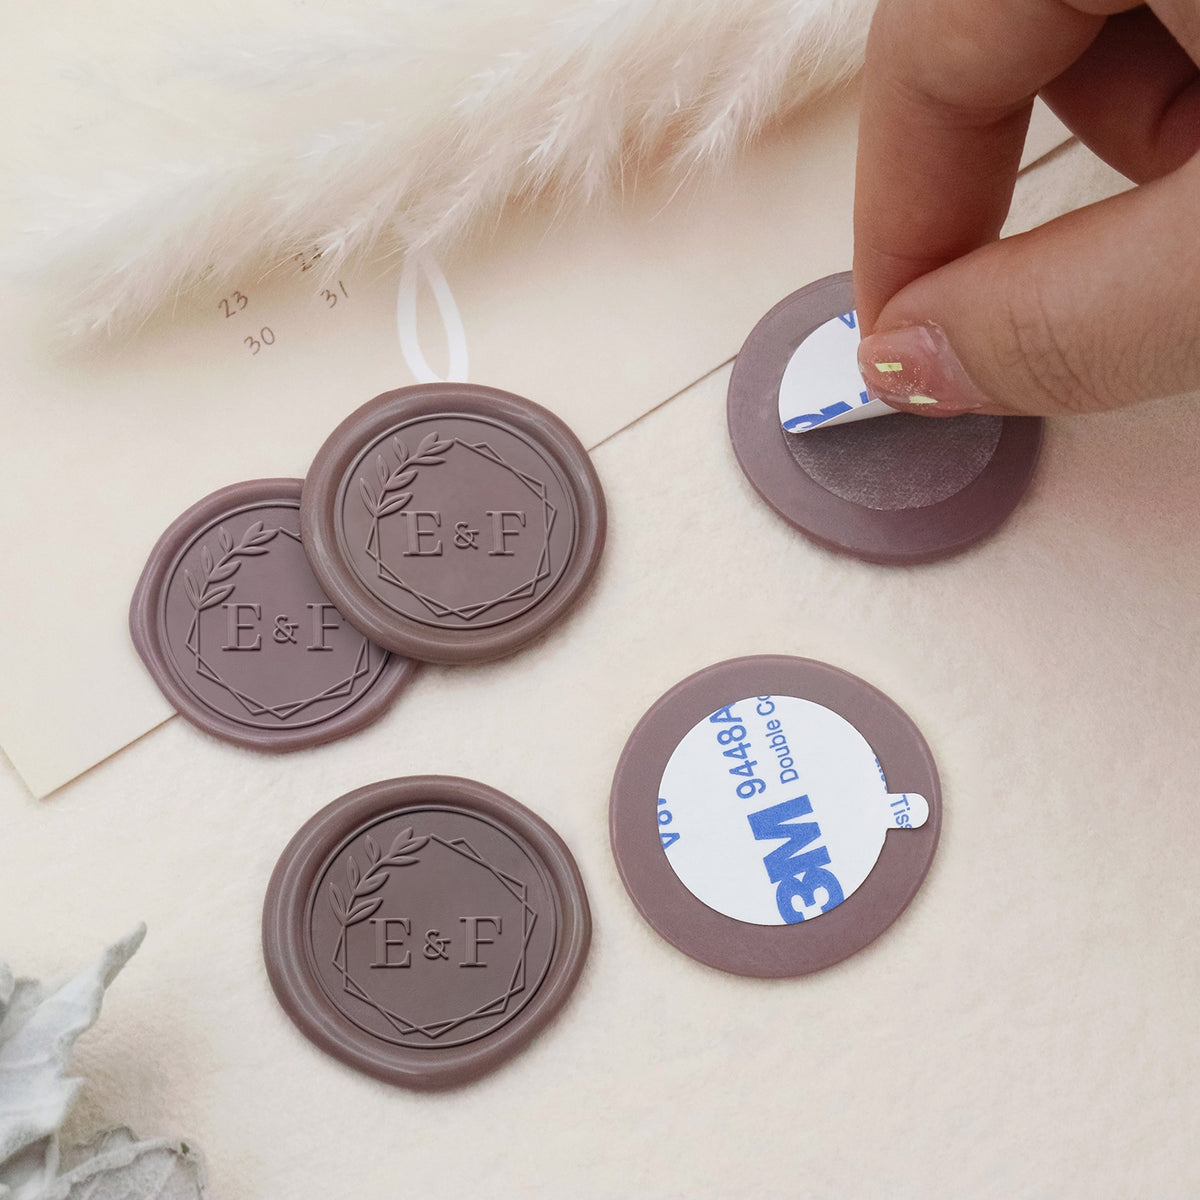 Custom Wax Seal Stickers - Custom Design Self-Adhesive Wax Seal Stickers with Your Artwork